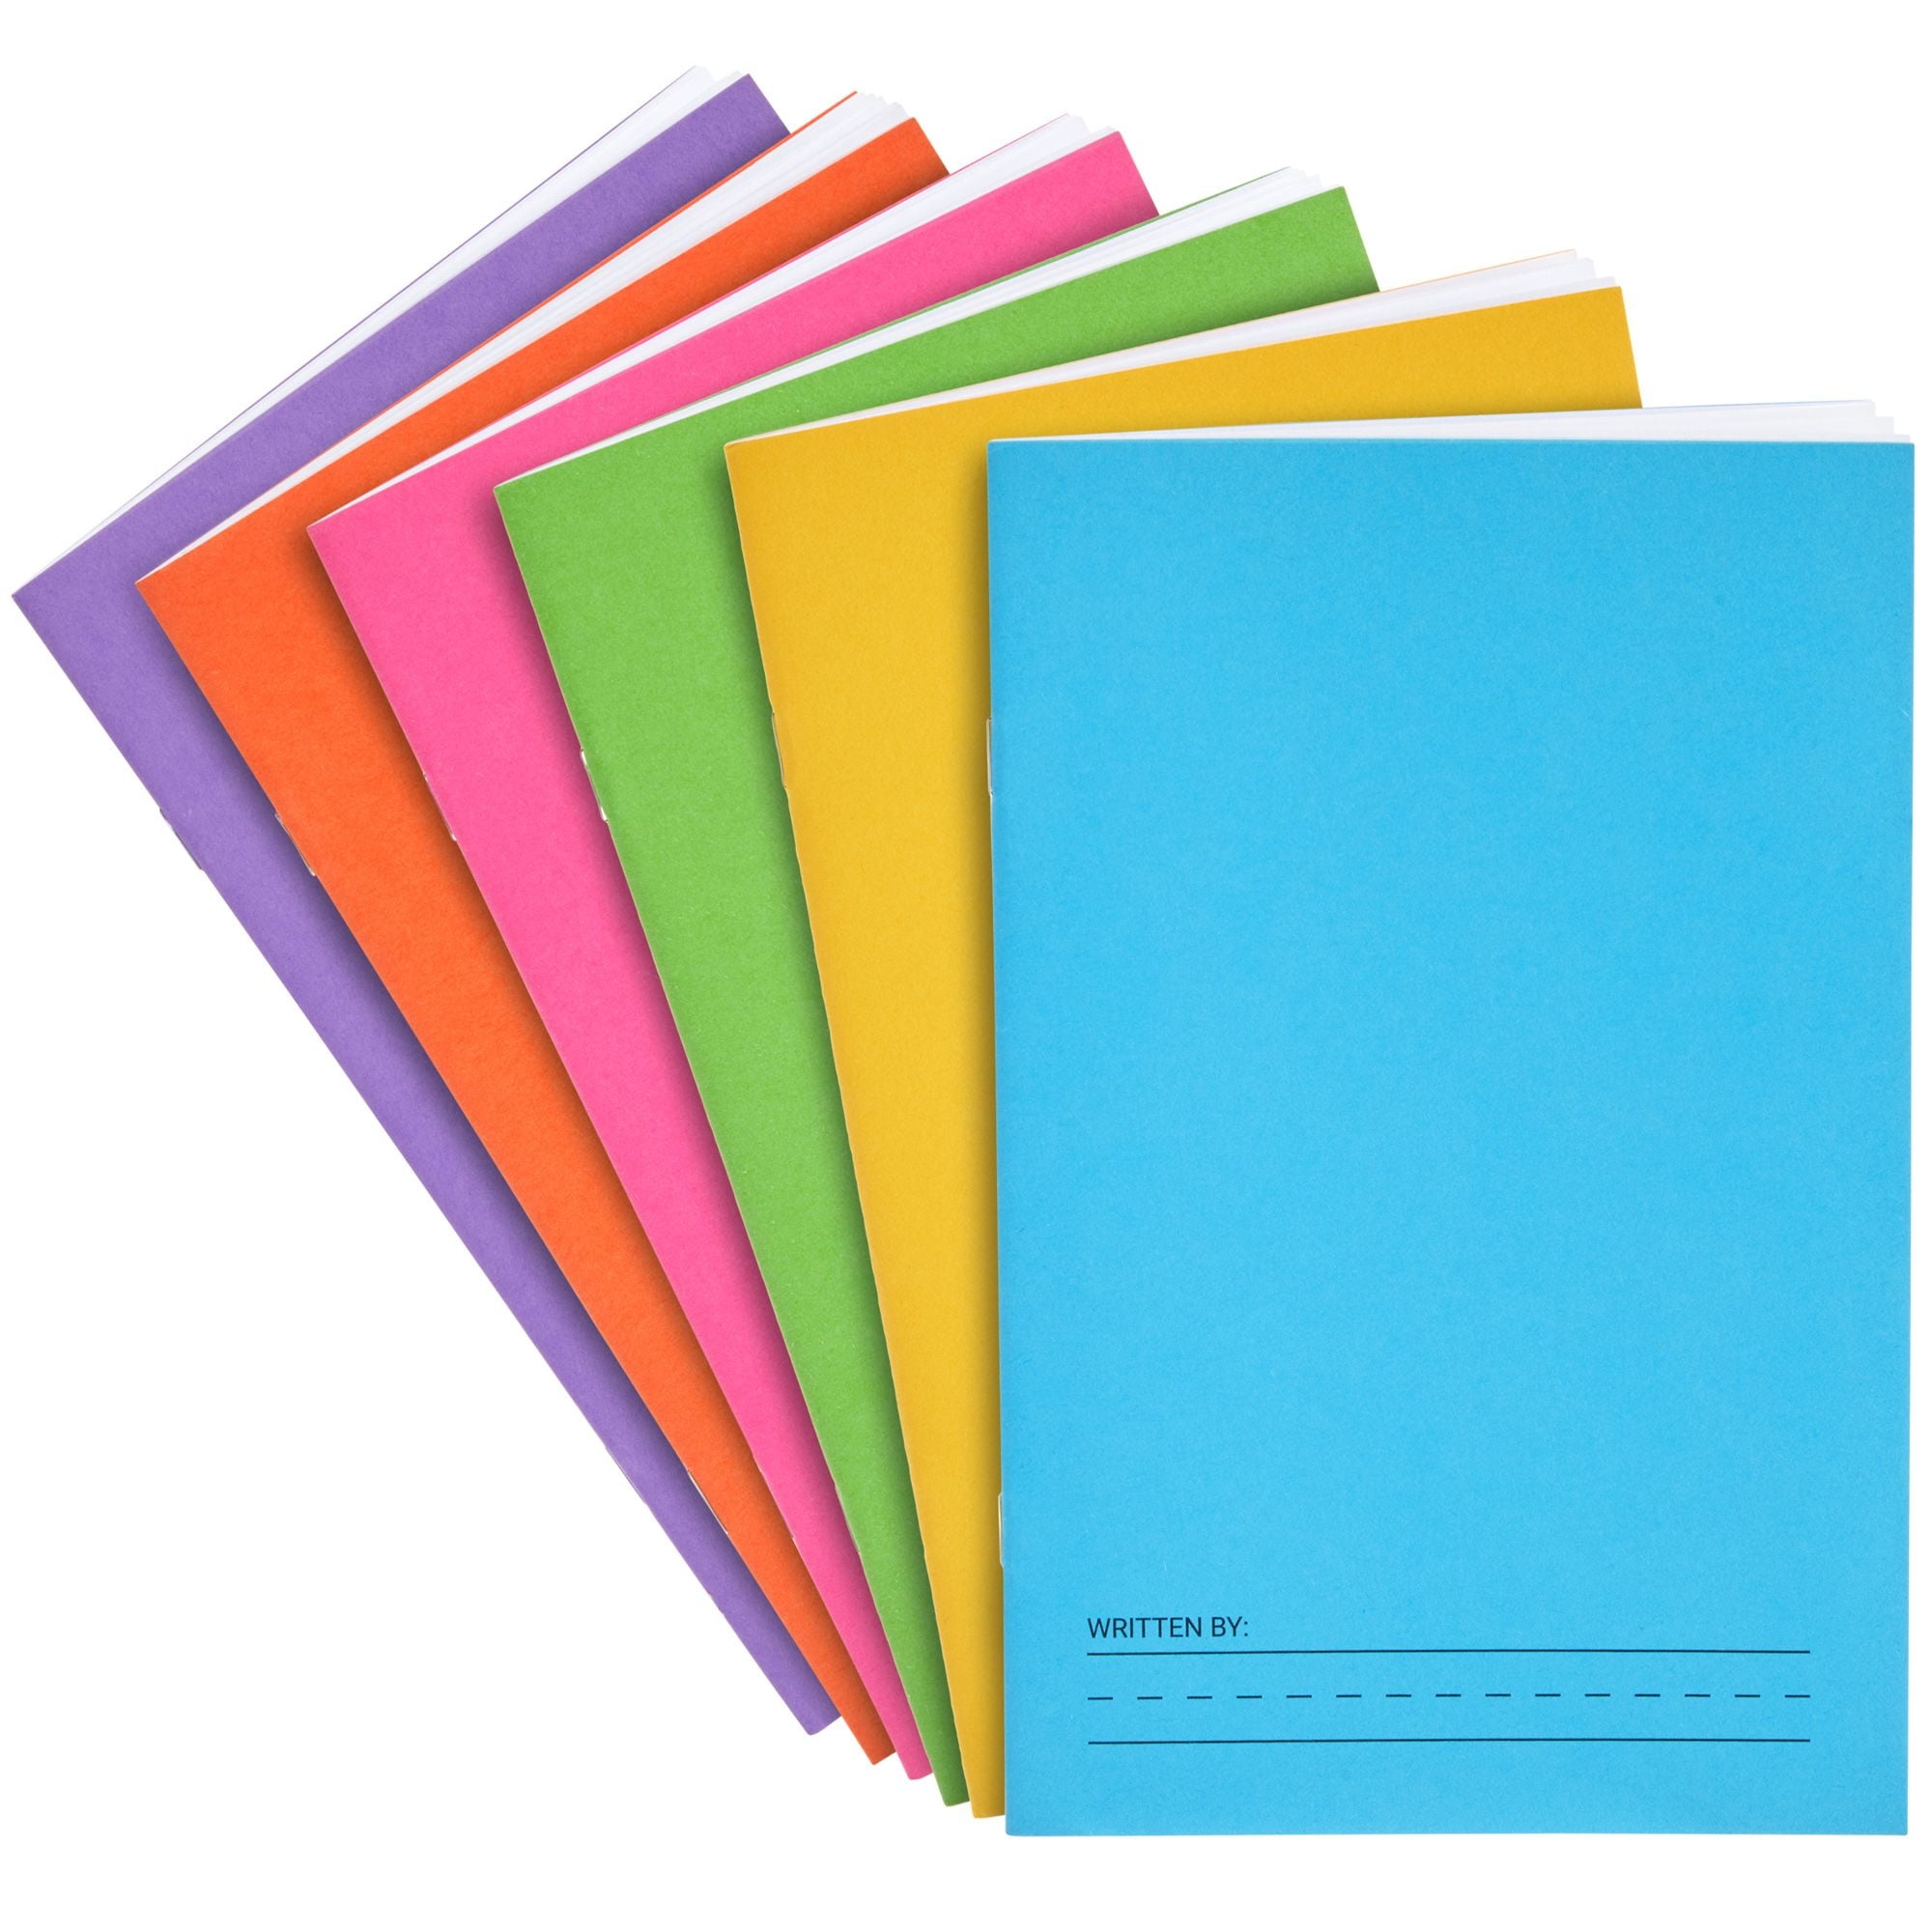 Bright Creations 6 Pack of Blank Books for Kids to Write Stories, Make Your Own Comic, Journal, or Book, Paperback (6 Colors, 12 Sheets/24 Pages